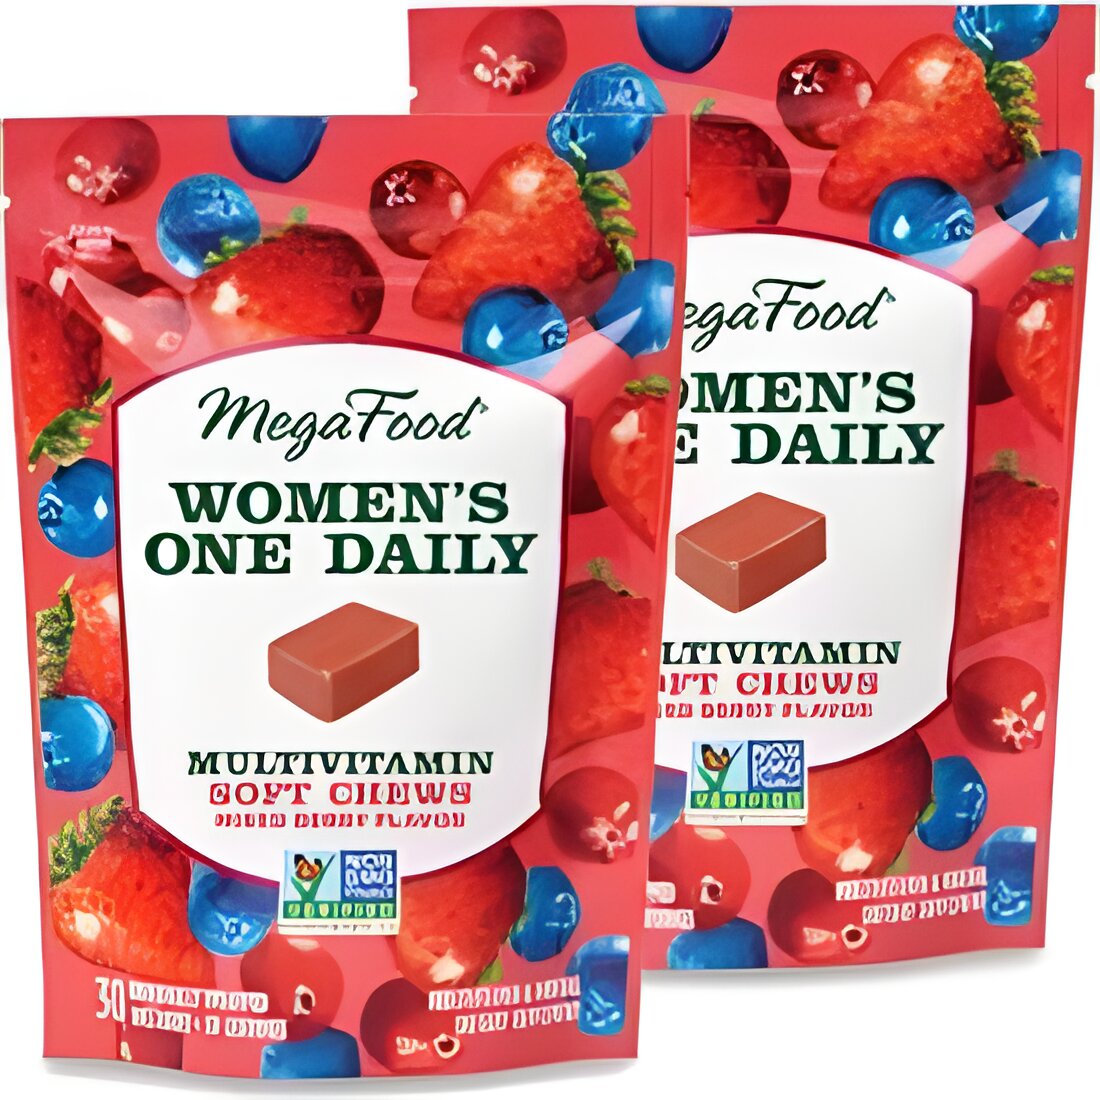 Free MegaFood Women's One Daily Multivitamin Soft Chews